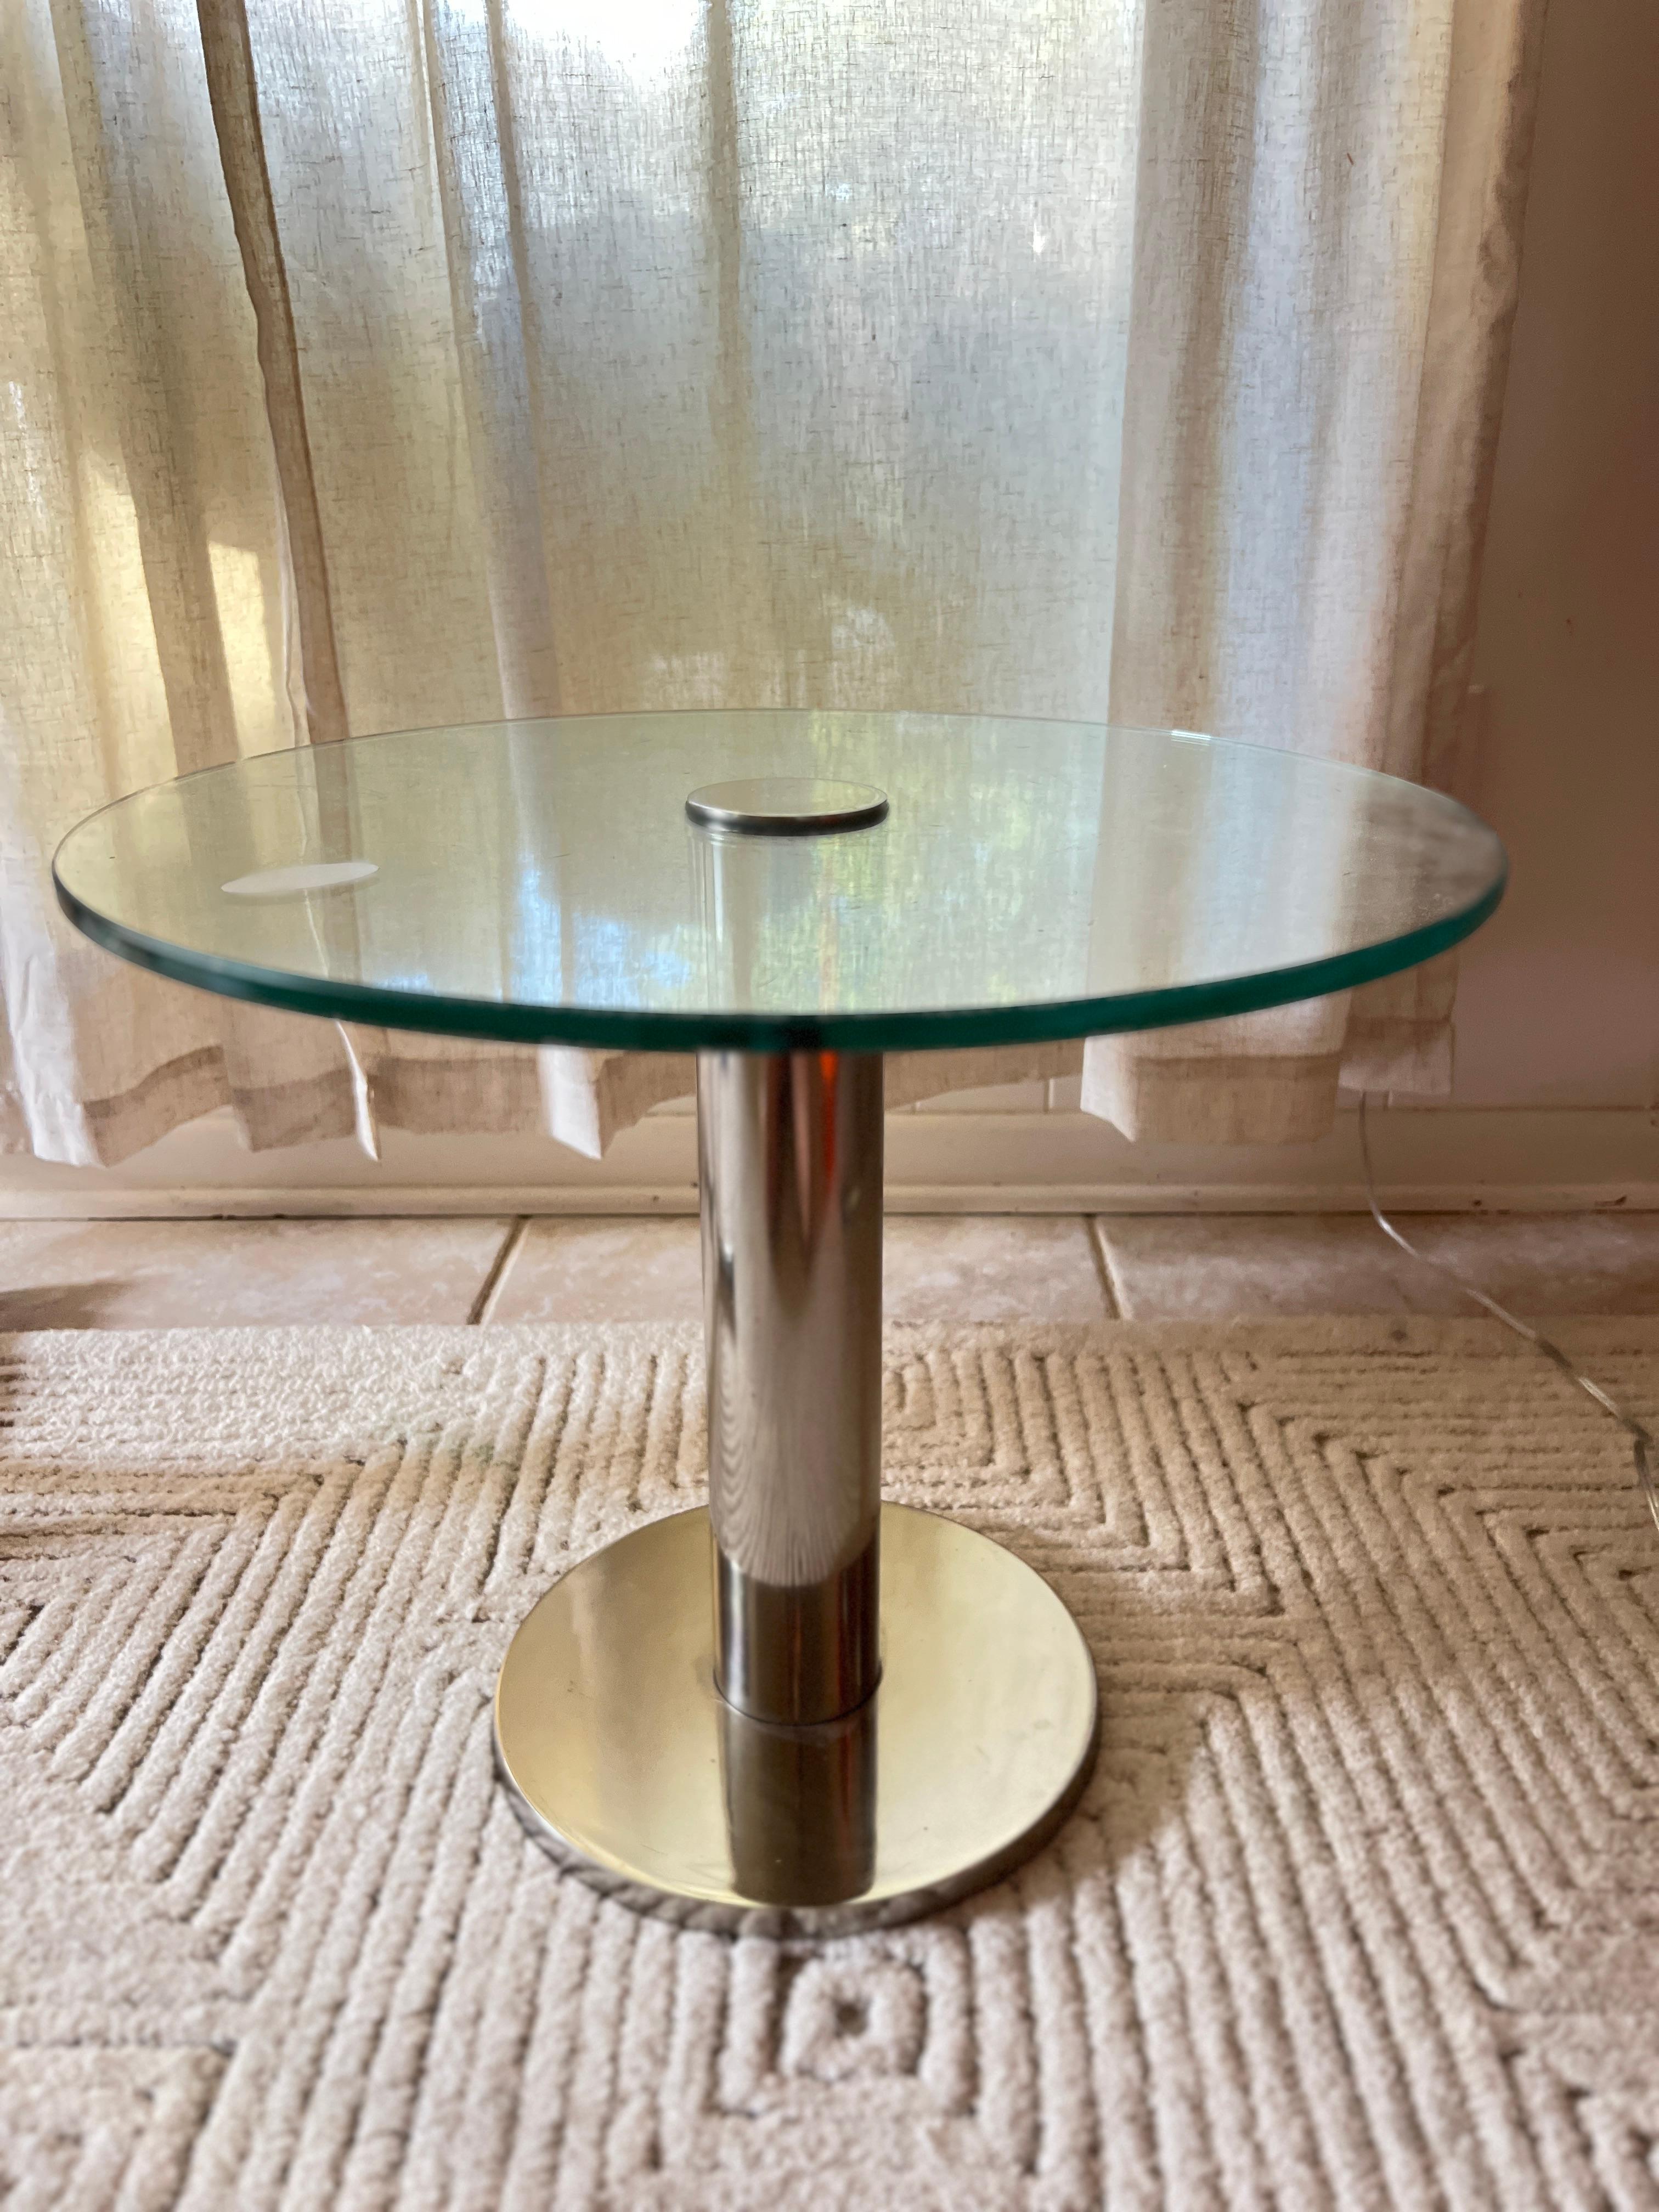 Vintage glass and chrome side table by Mirodan, made in Belgium circa 1960s 1